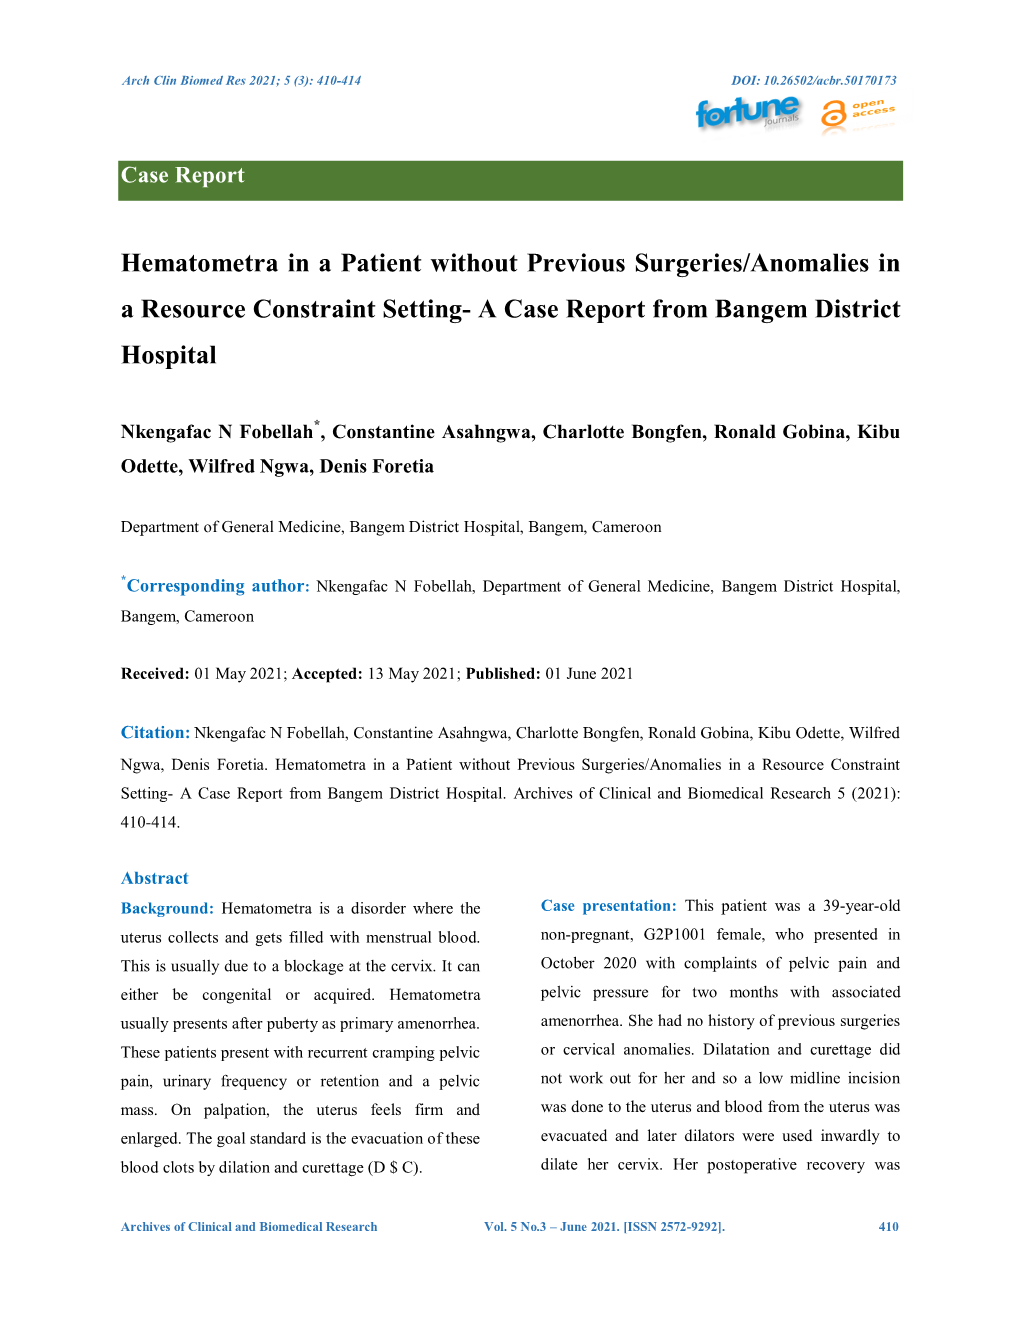 Hematometra in a Patient Without Previous Surgeries/Anomalies in a Resource Constraint Setting- a Case Report from Bangem District Hospital